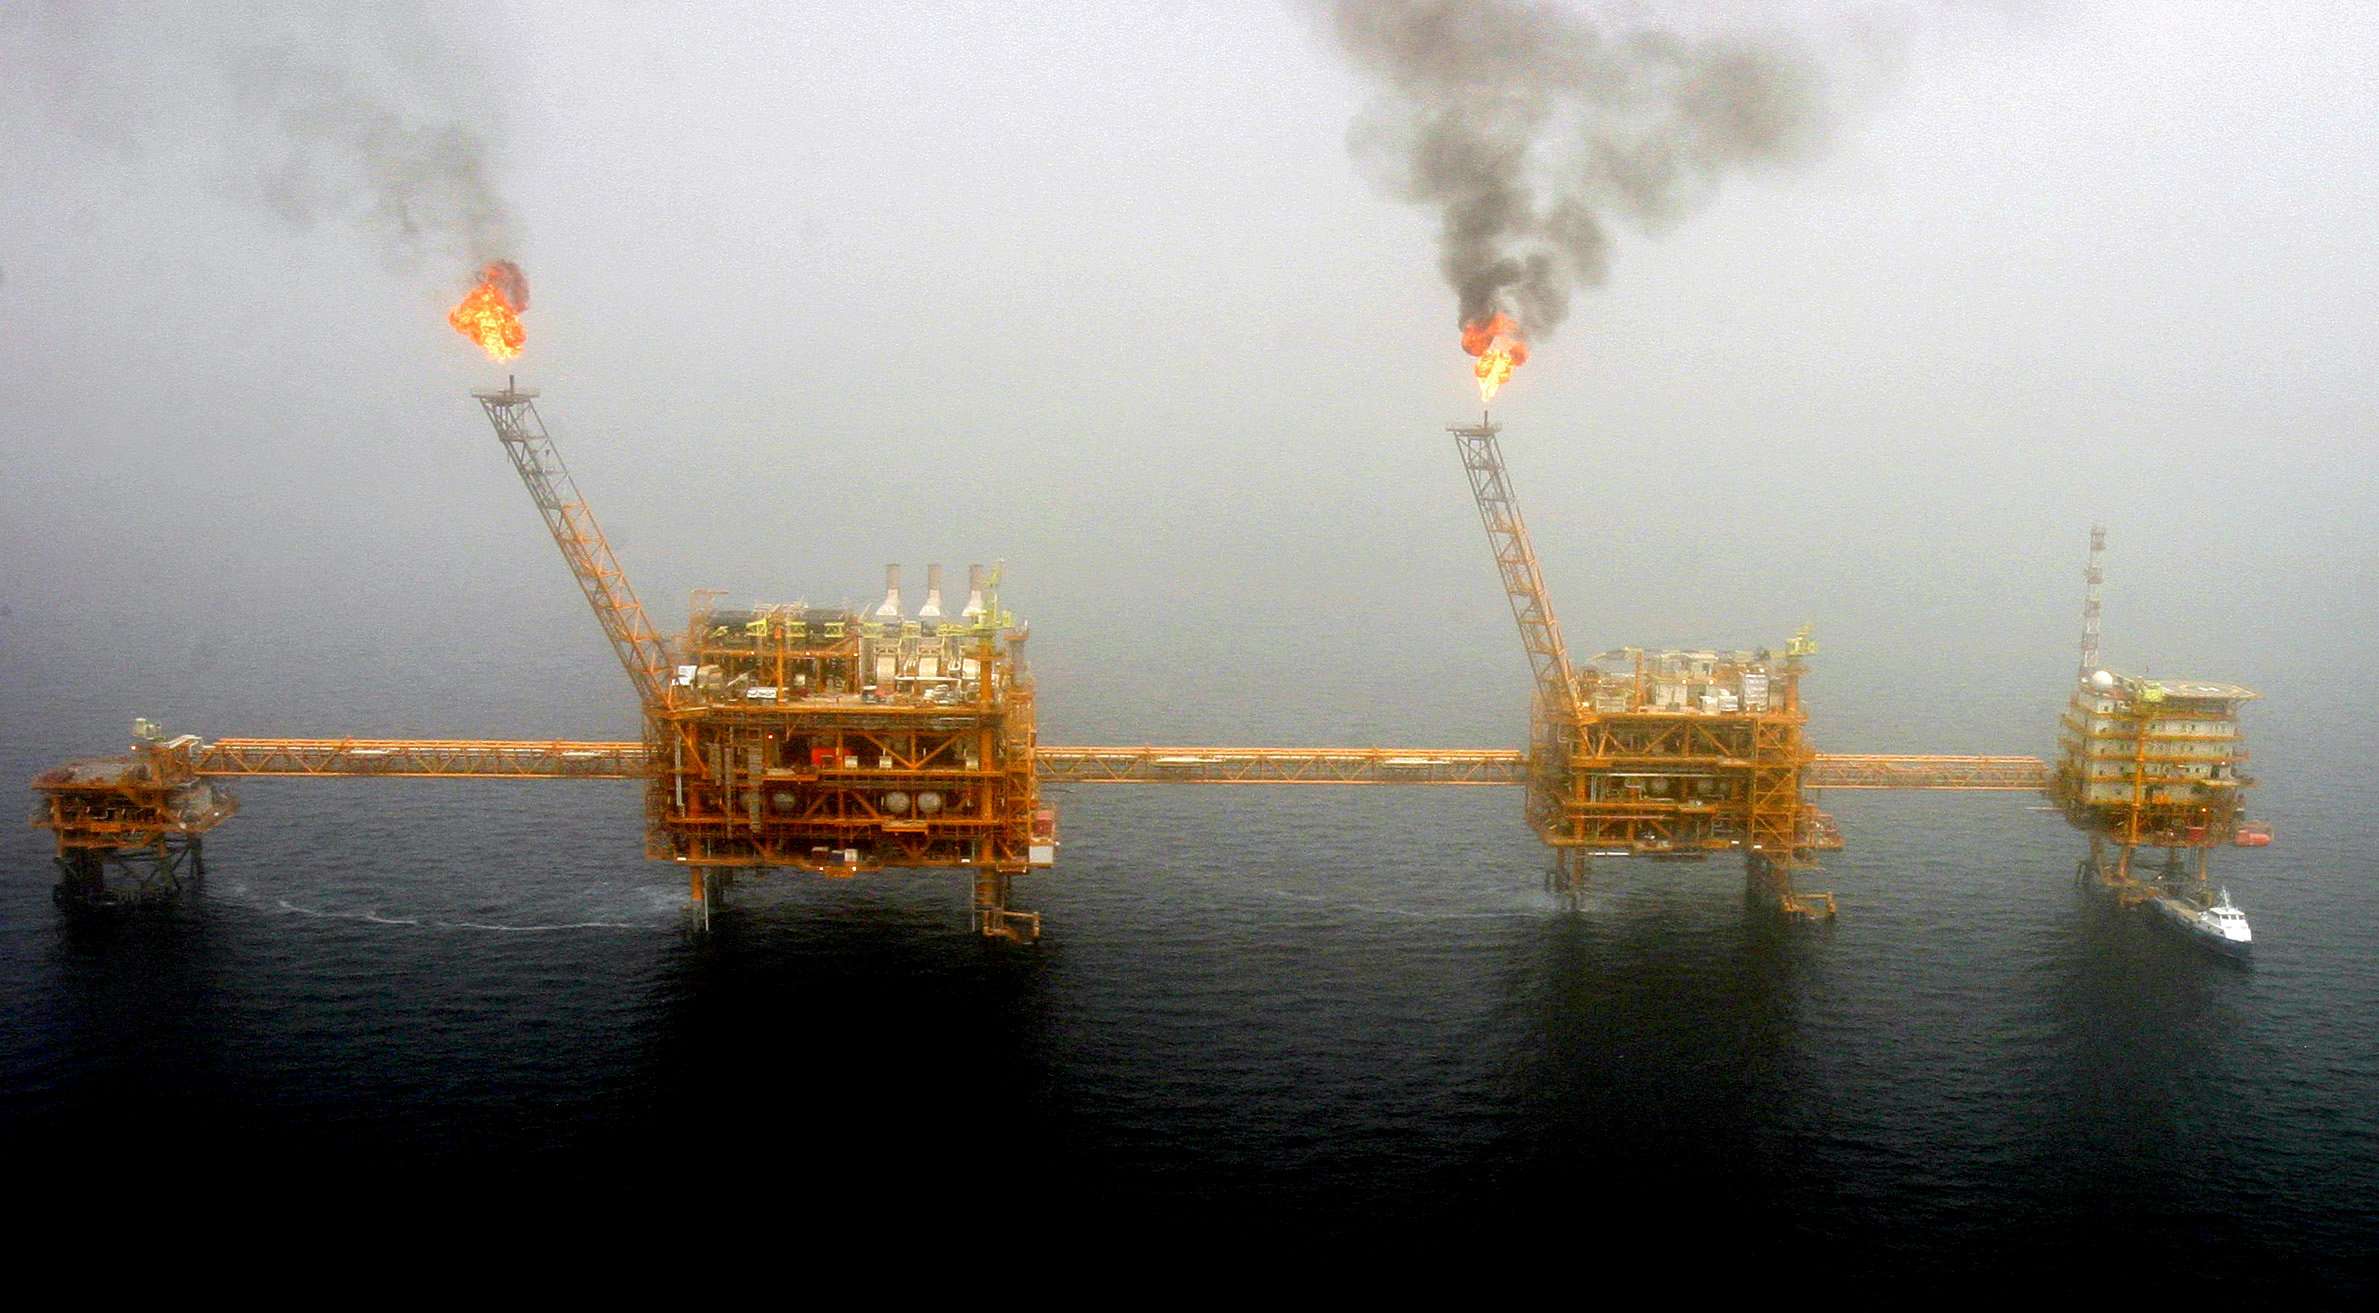 Iran relies entirely on imported parts for its rigs